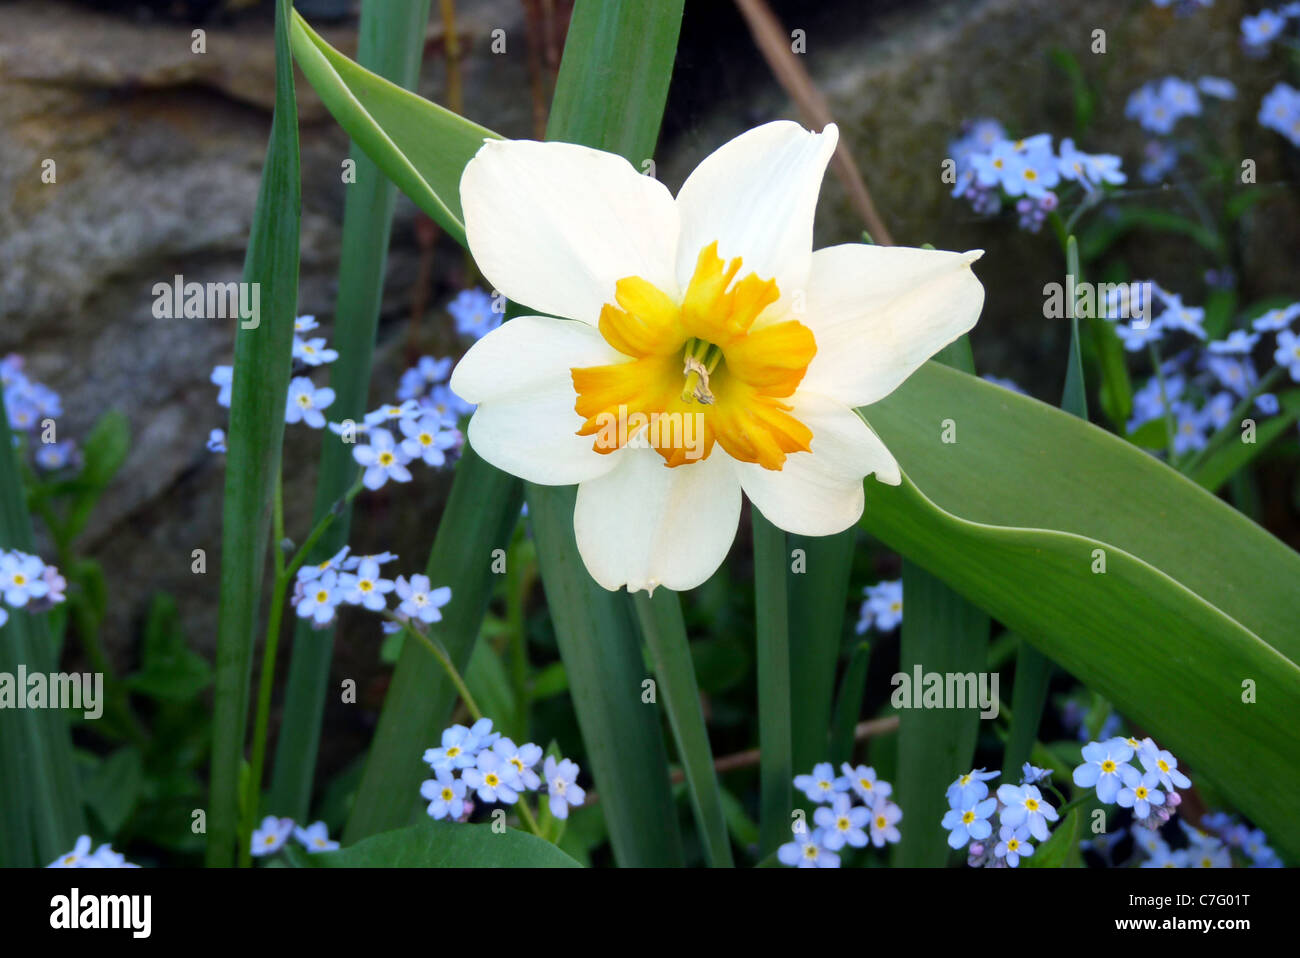 Spring flowers of daffodils and forget-me-nots blooming in garden near rock wall, New England, Vermont Stock Photo